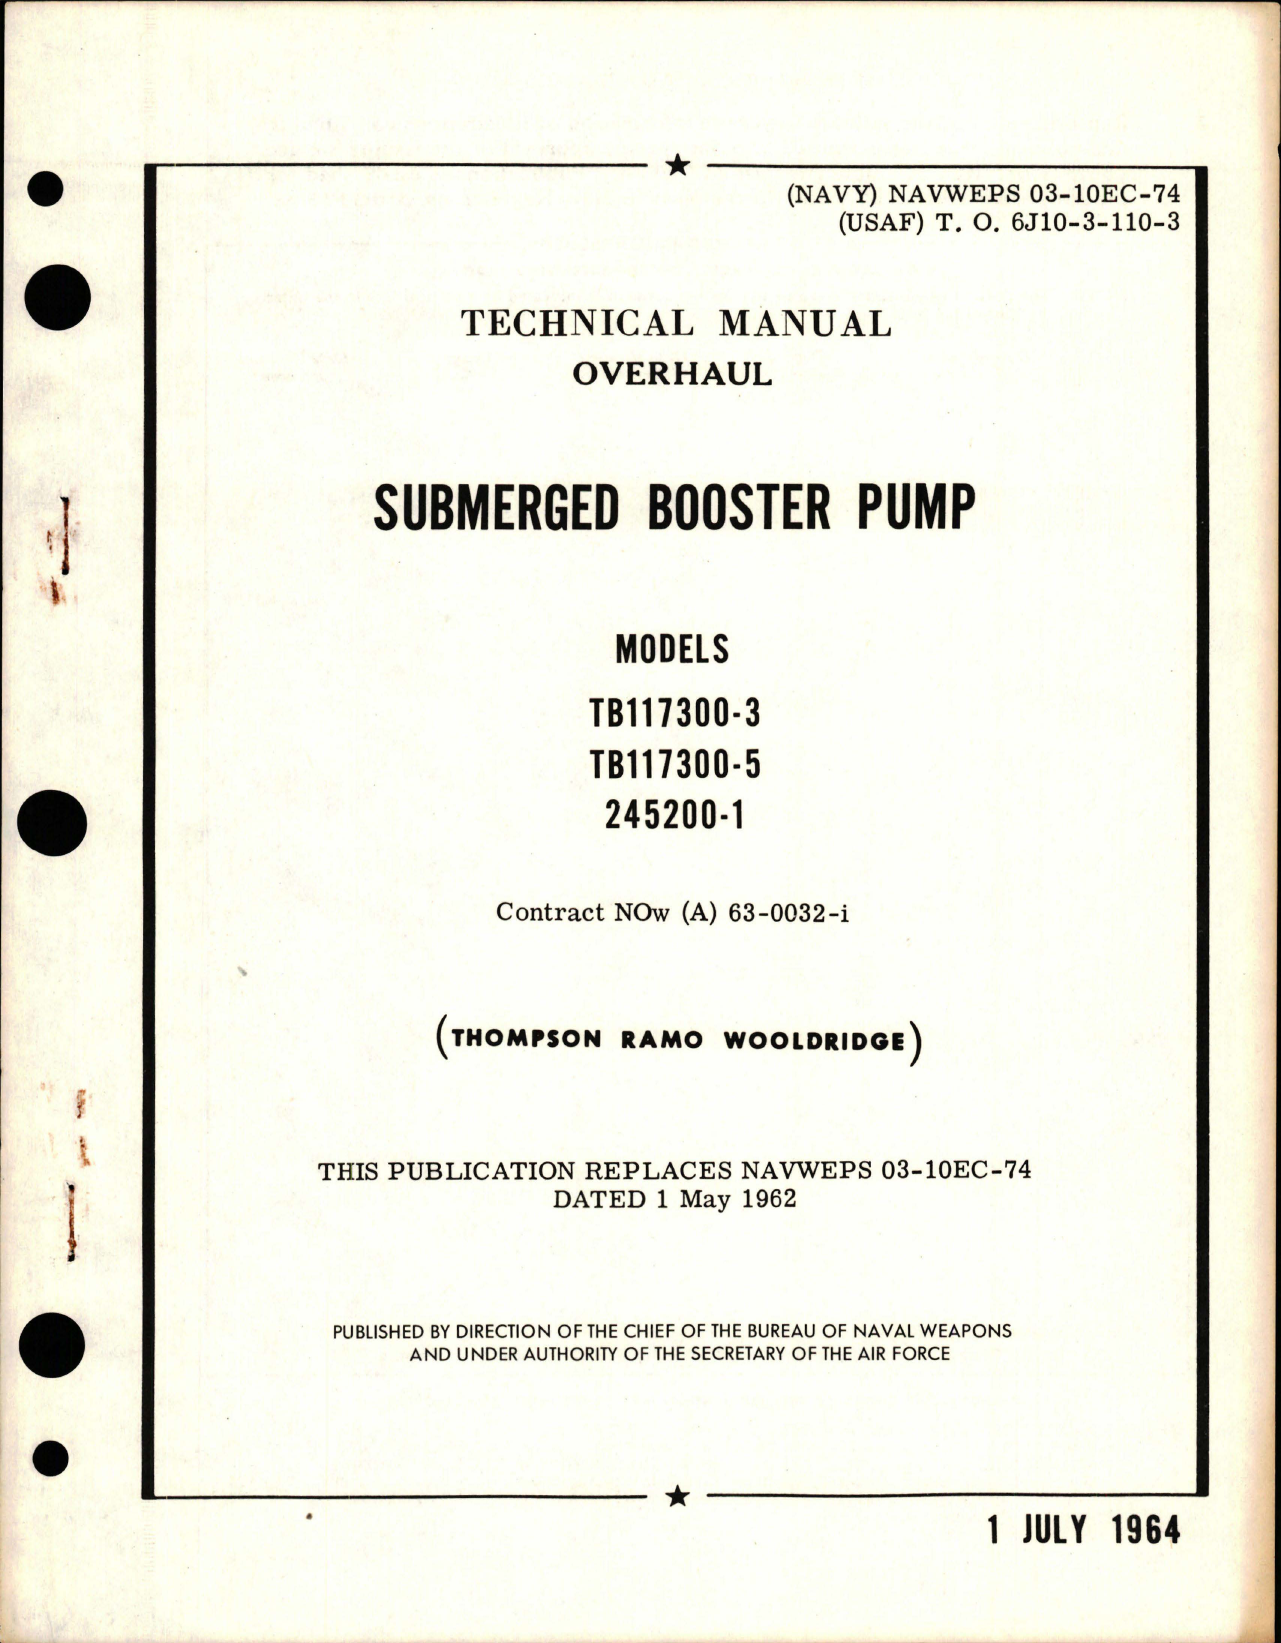 Sample page 1 from AirCorps Library document: Overhaul for Submerged Booster Pump - Models TB117300-3, TB117300-5 and 245200-1